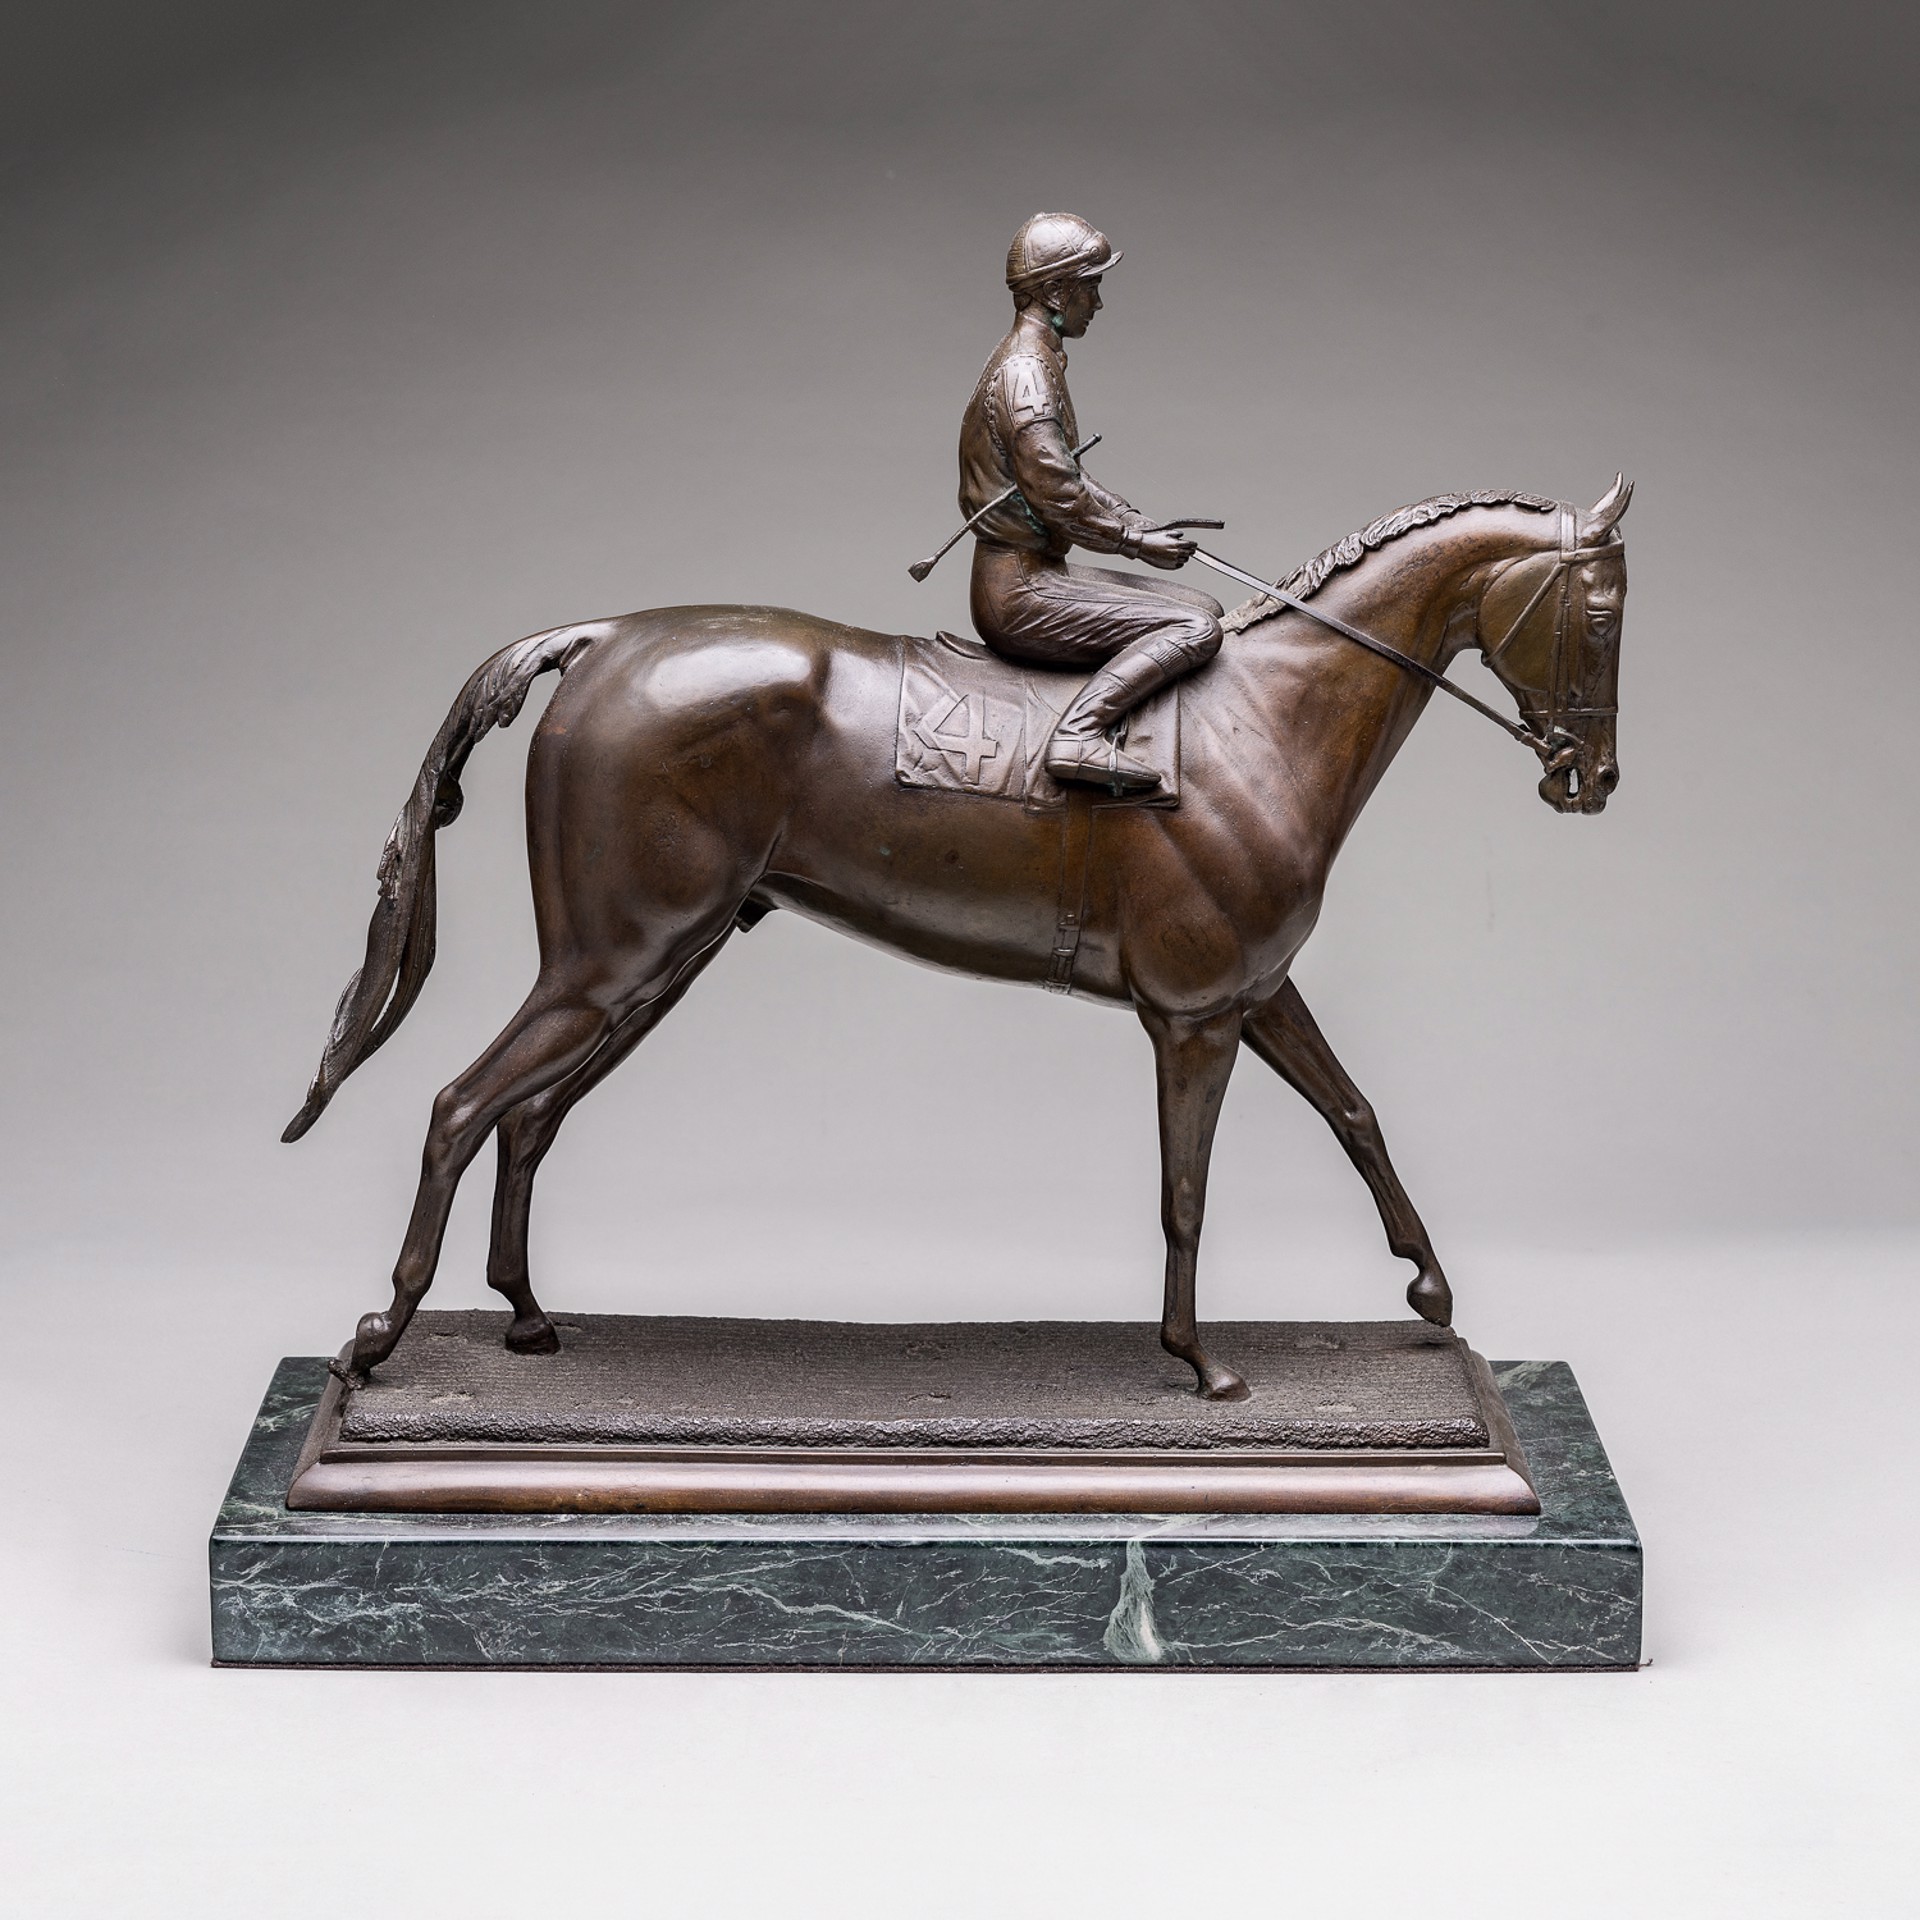 HORSE AND JOCKEY by George Claxton